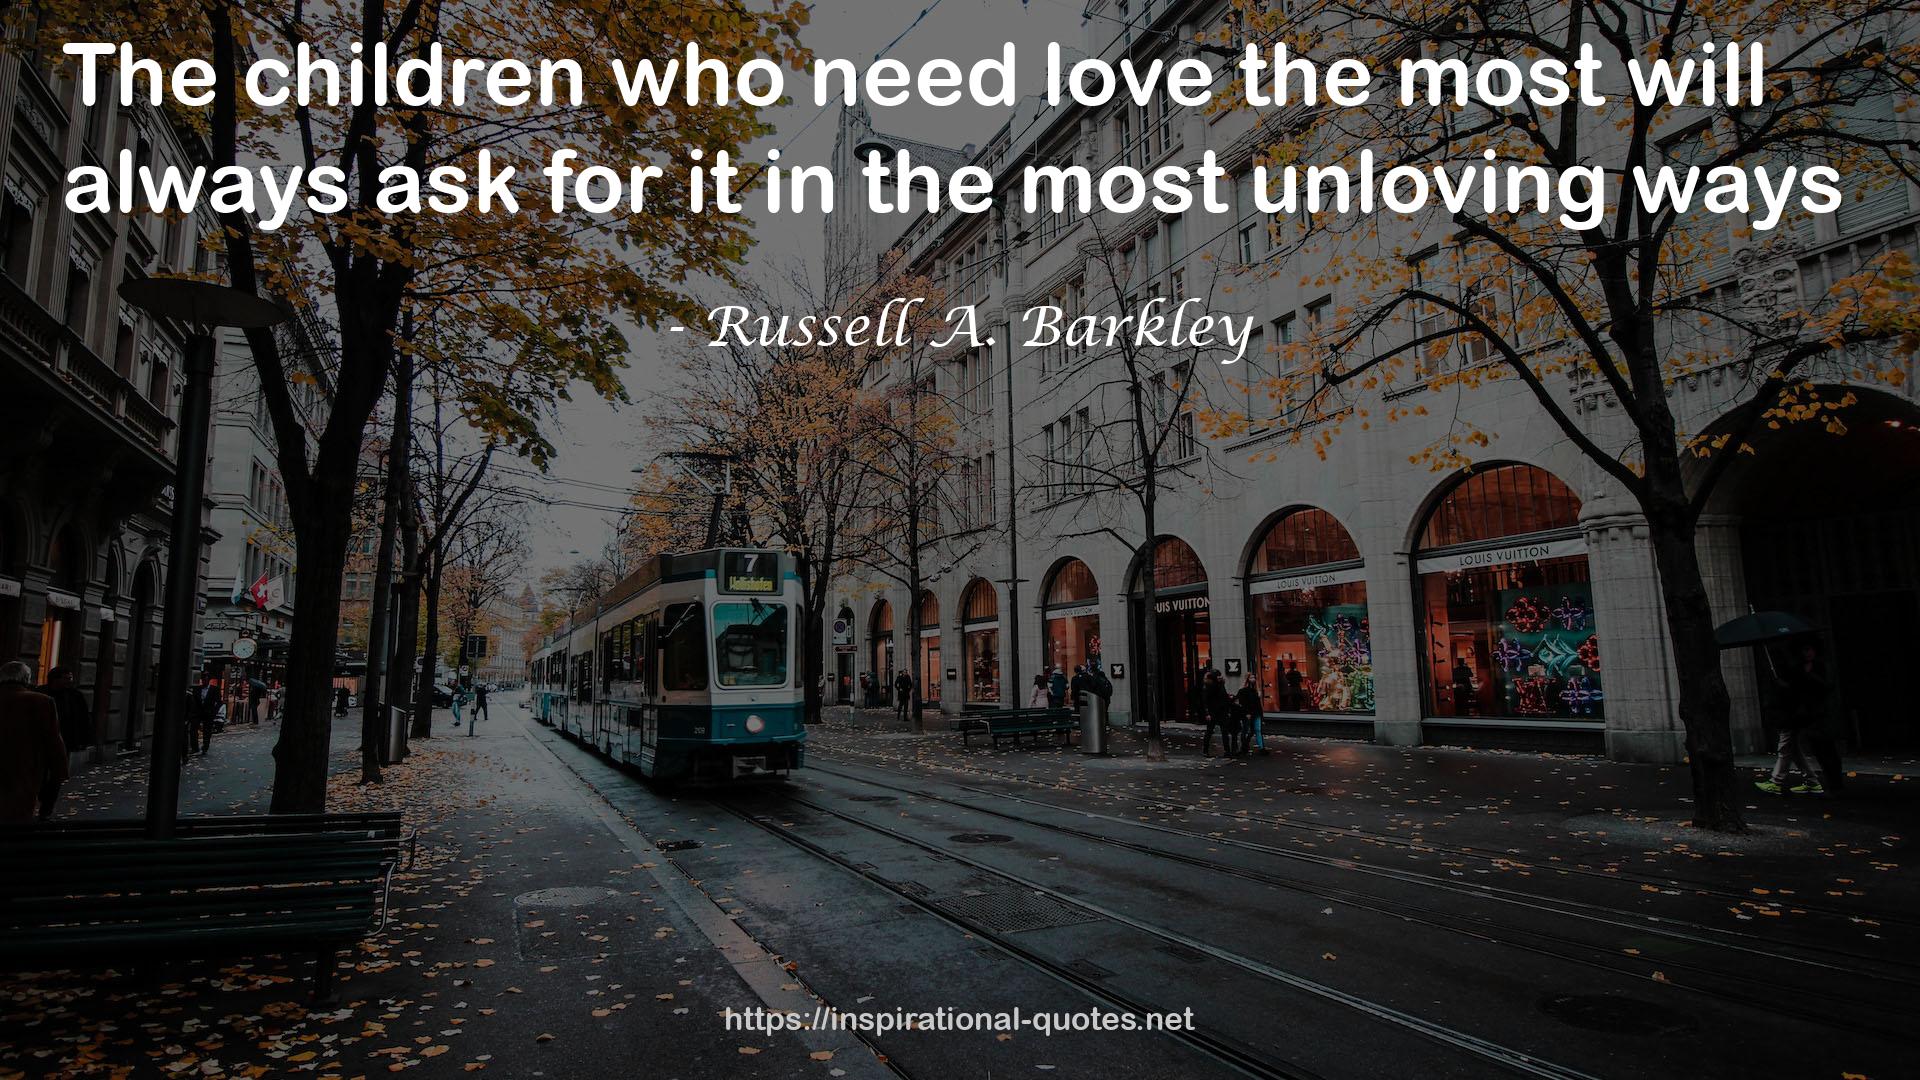 Russell A. Barkley QUOTES